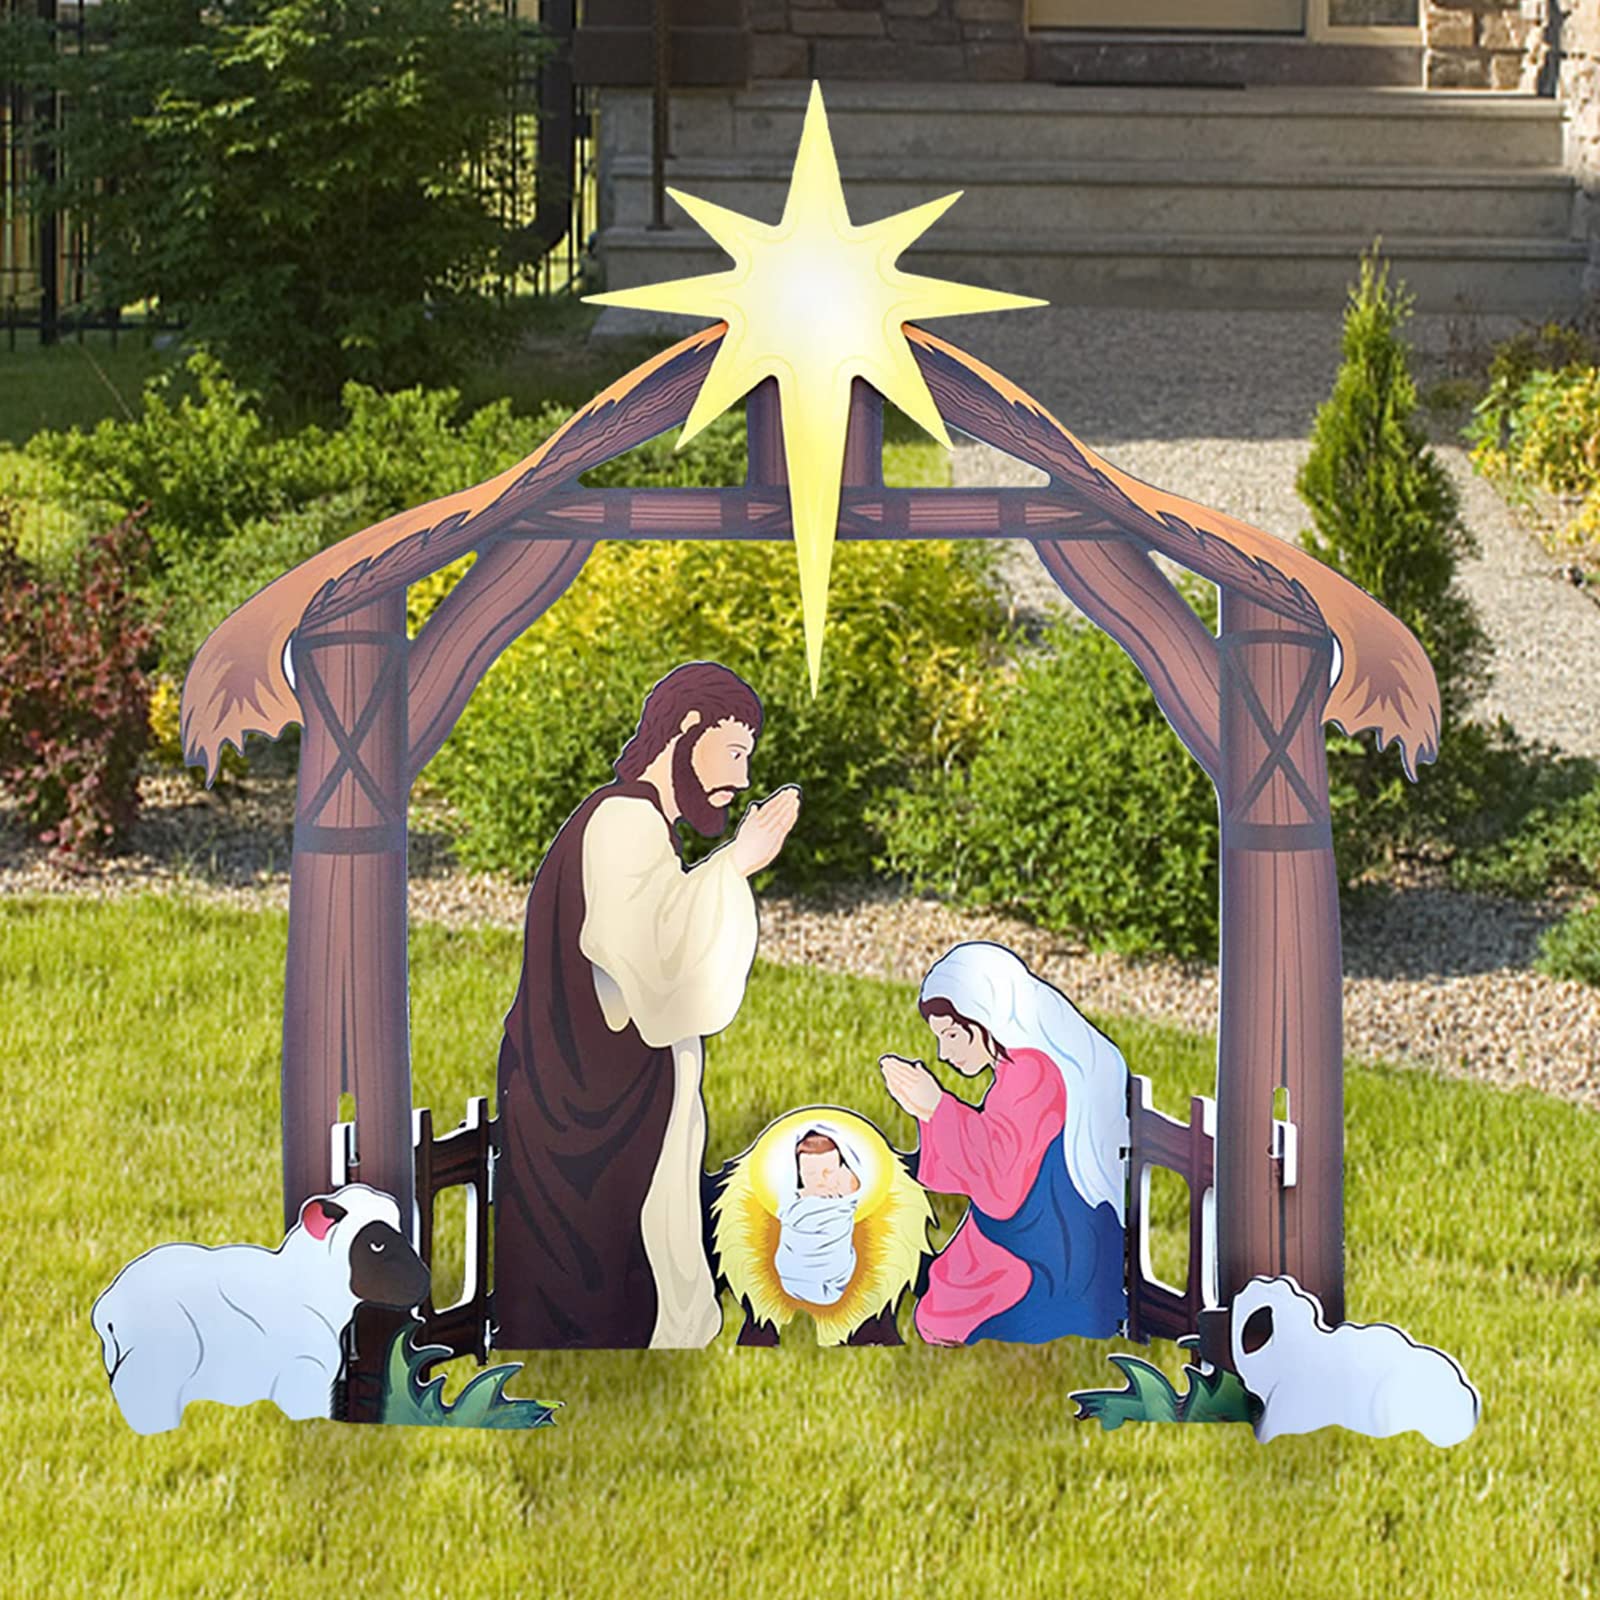 Outdoor Christmas Decorations - Outdoor Nativity Scene Set for Christmas Outdoor, Yard Nativity and Manger Scene Holy Family Full Yard Scene, Xmas Nativity Lawn Religious Scenes (Multicolor-Large)